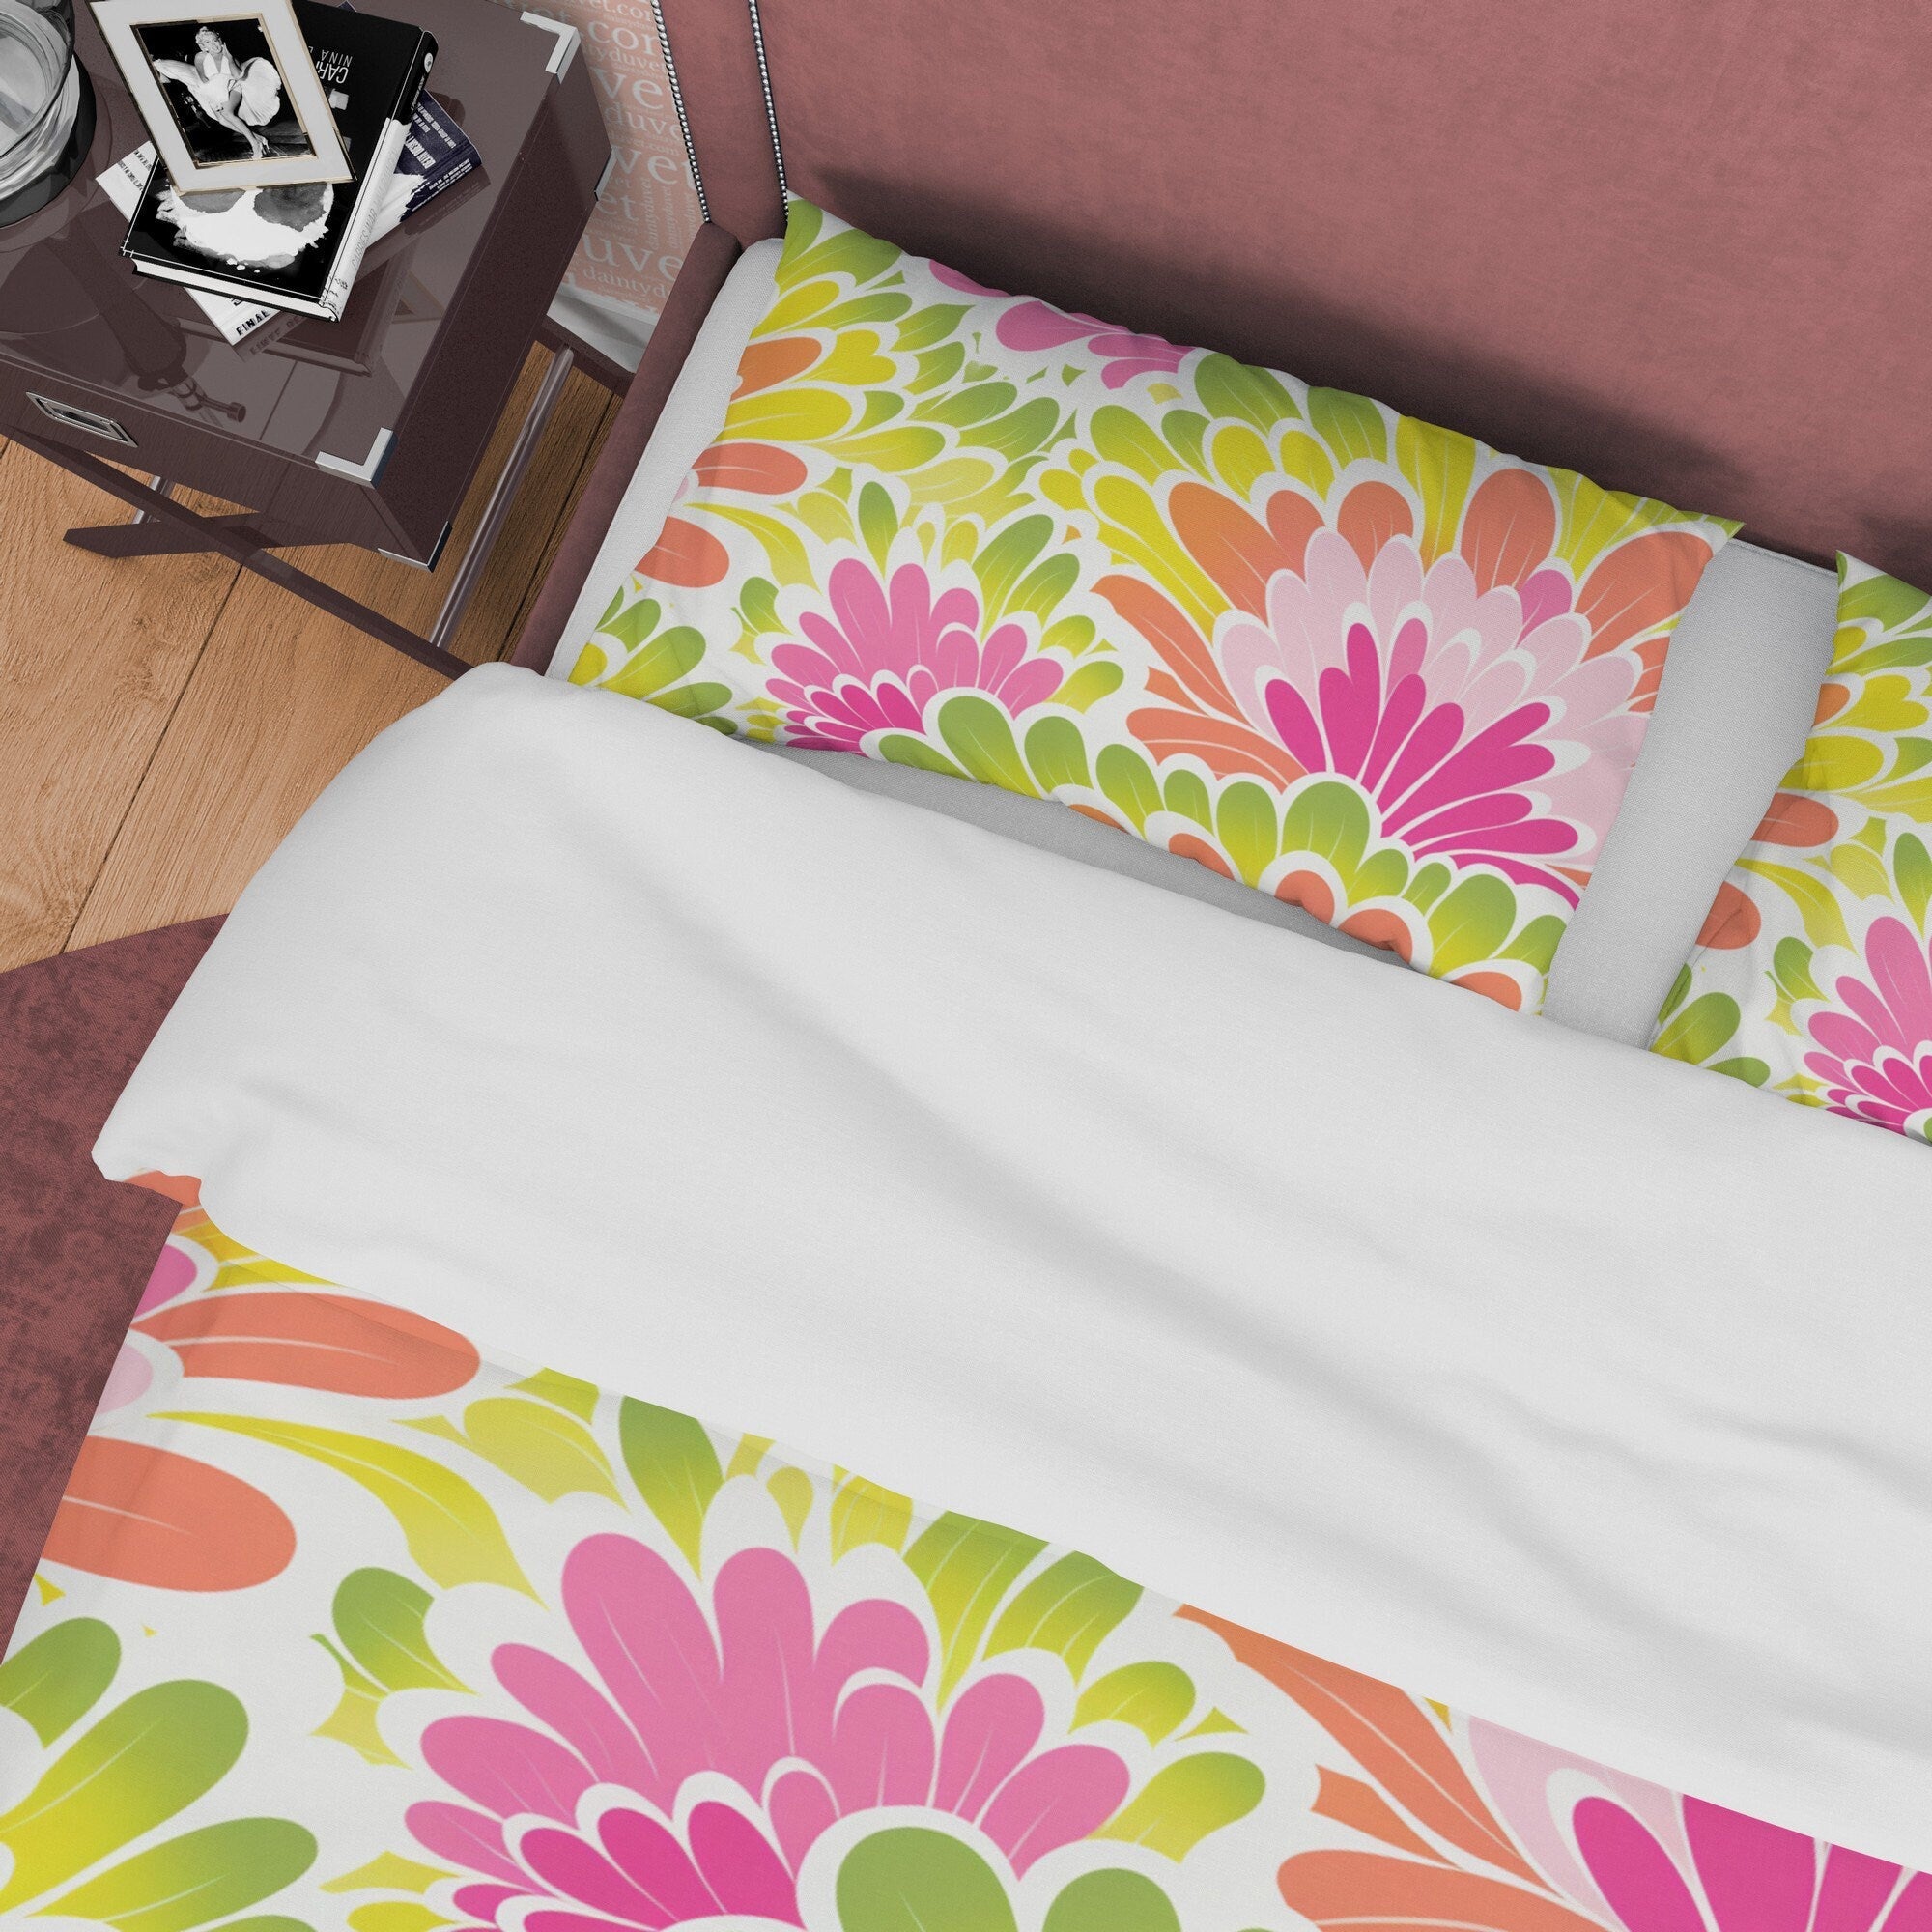 Colorful Floral Boho Bedding Pink Duvet Cover Bohemian Bedroom Set, Aesthetic Yellow Green Bedspread, Bright Colors Unique Room Decor